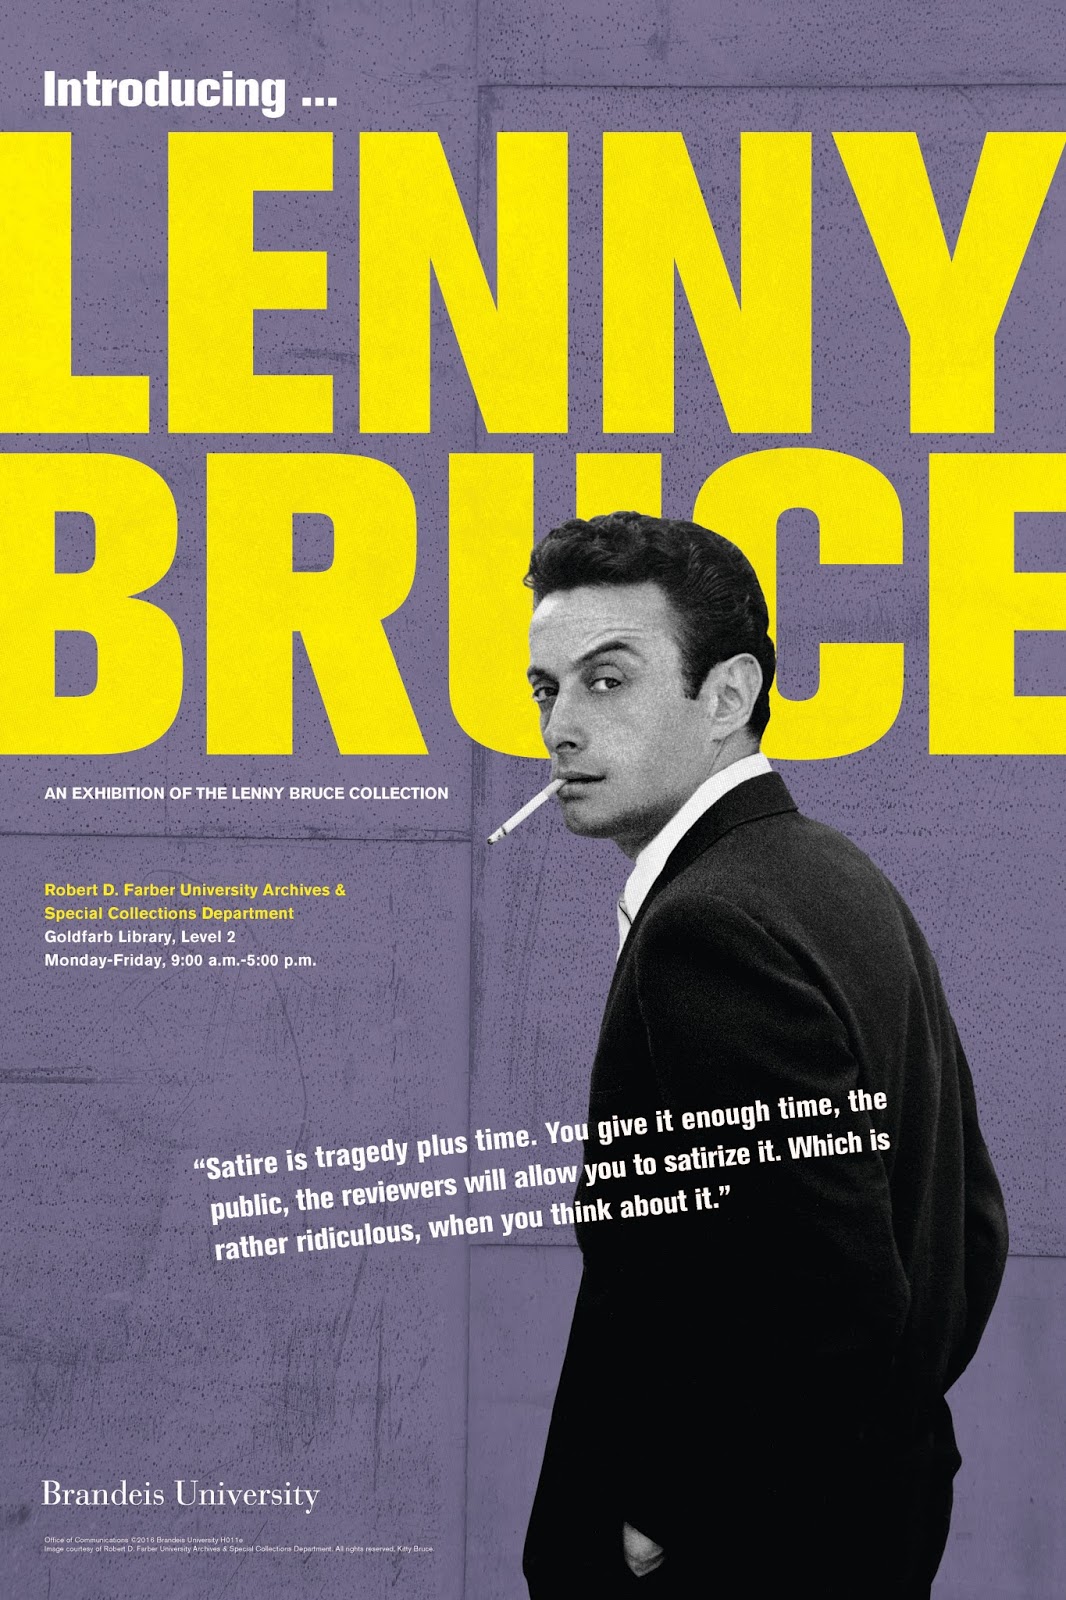 Brandeis flyer introducing the Lenny Bruce exhibition in 2016.